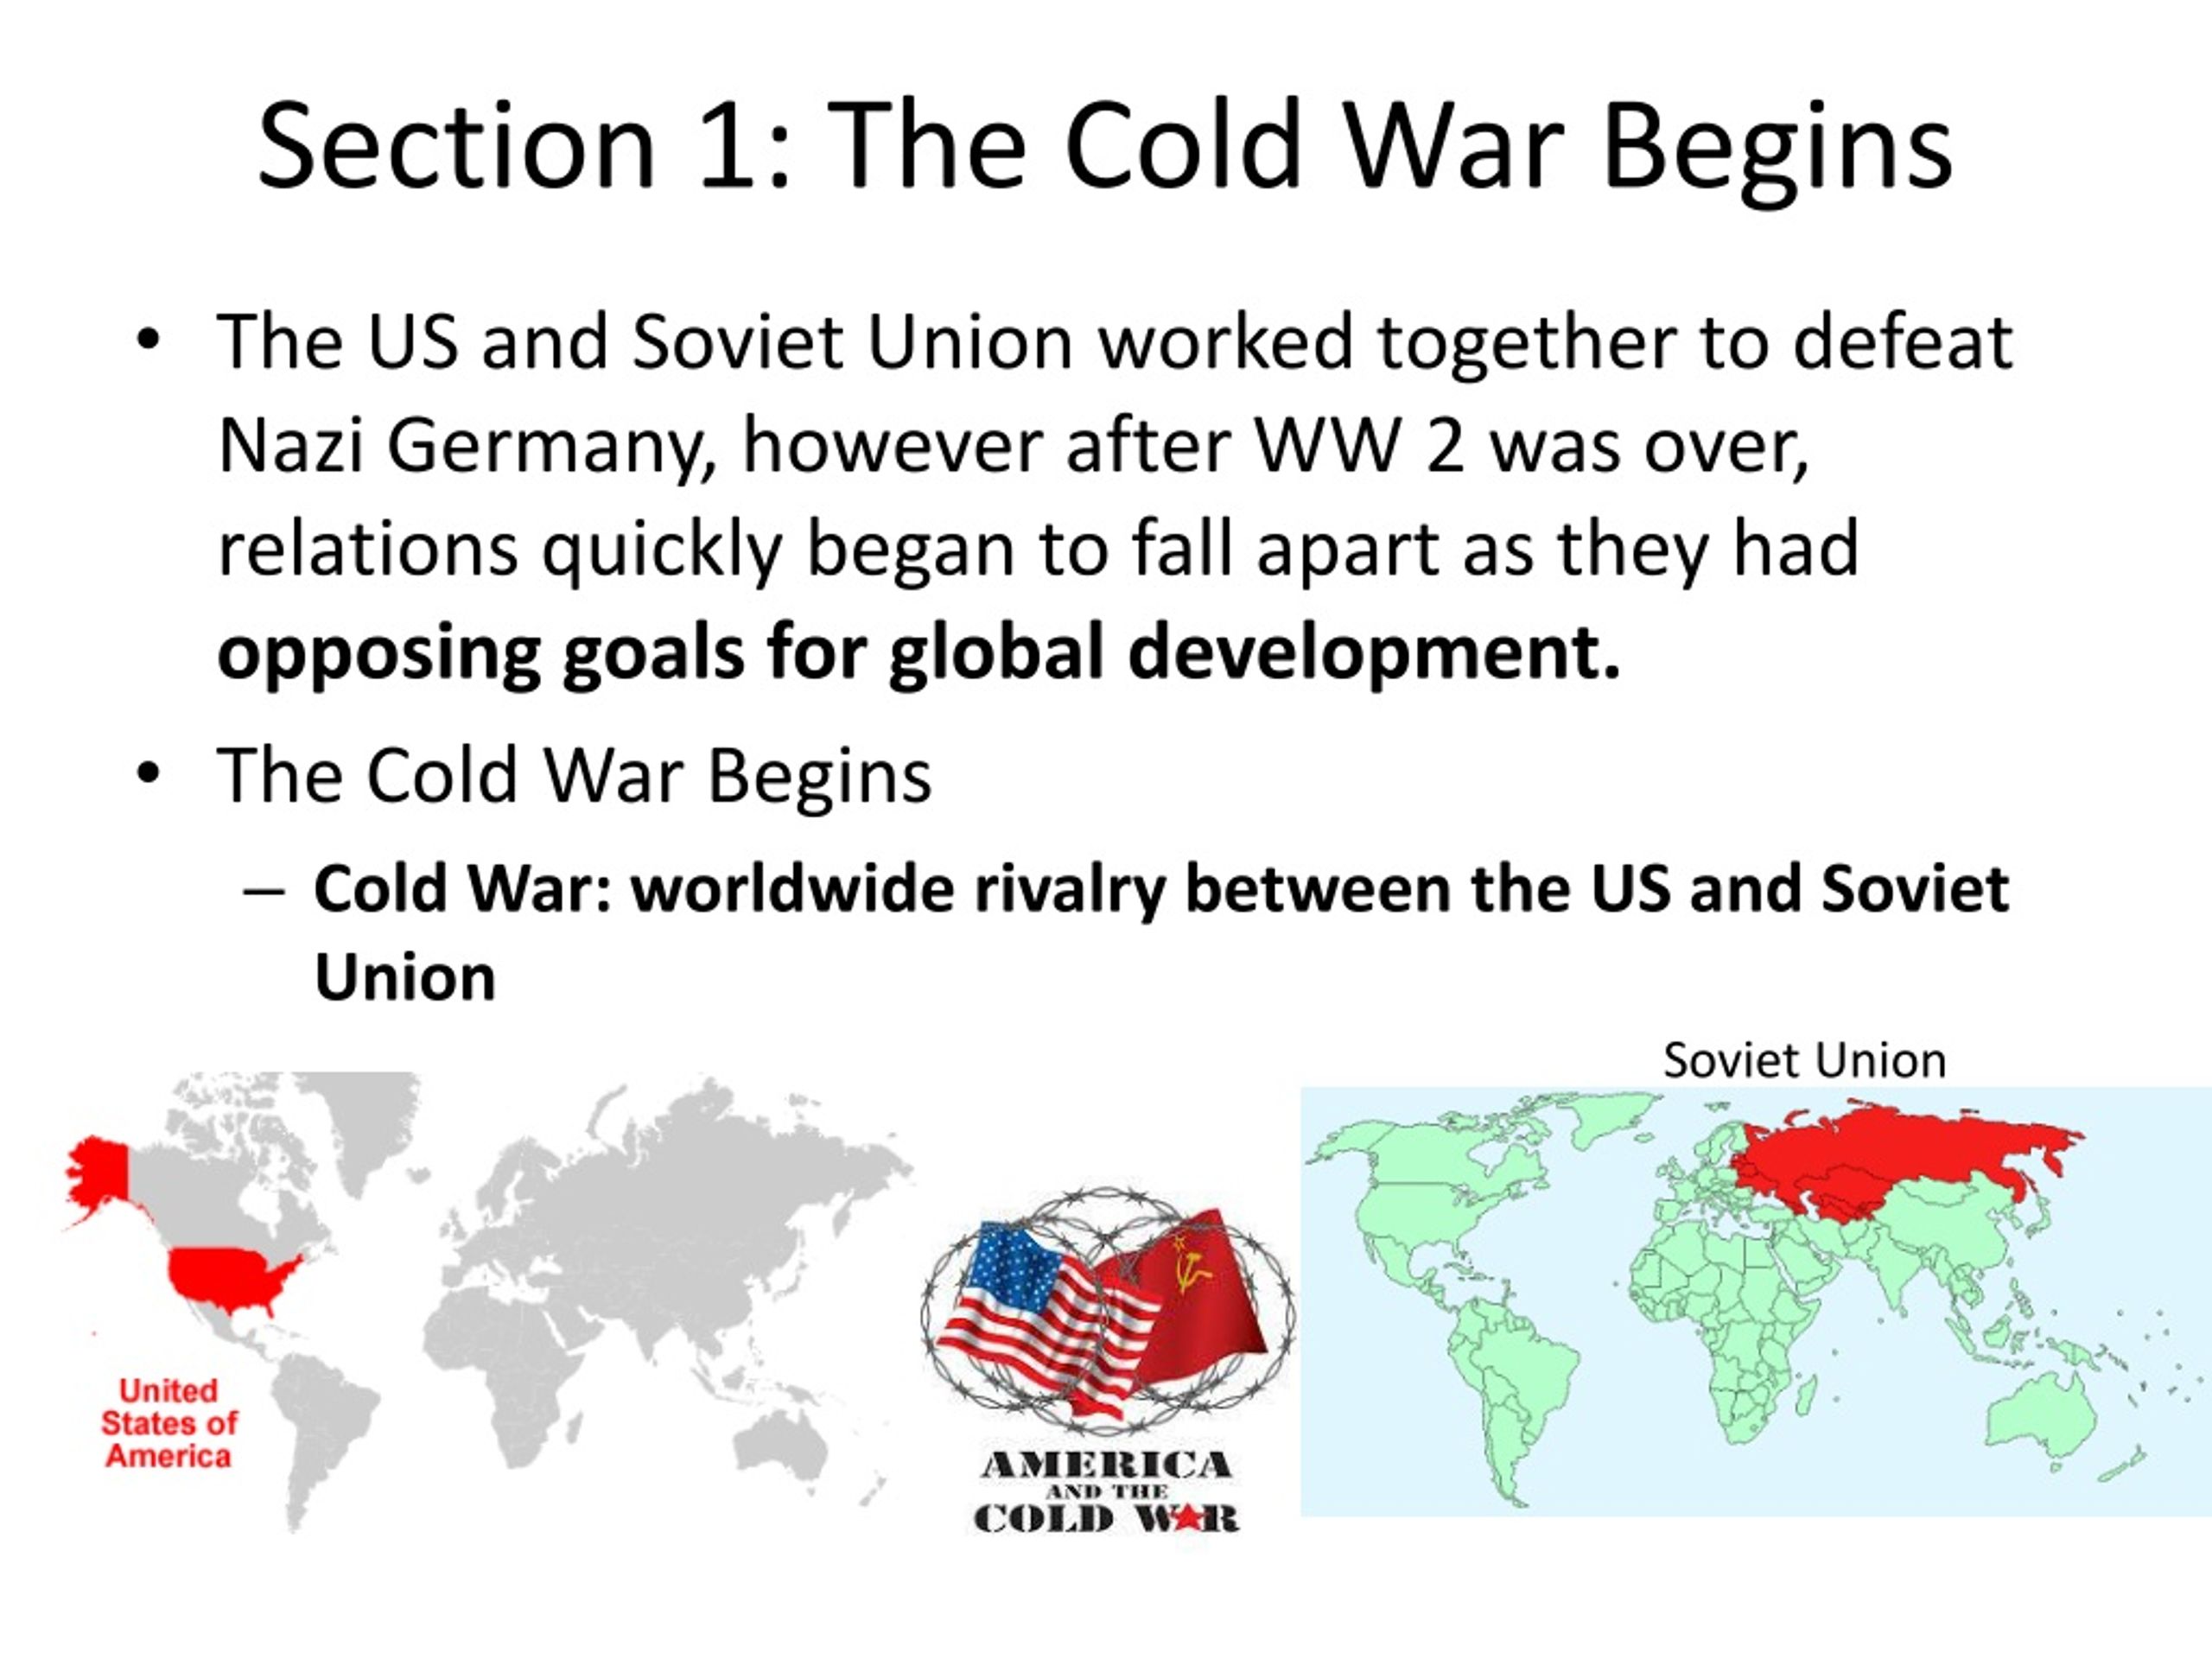 why is it called teh cold war